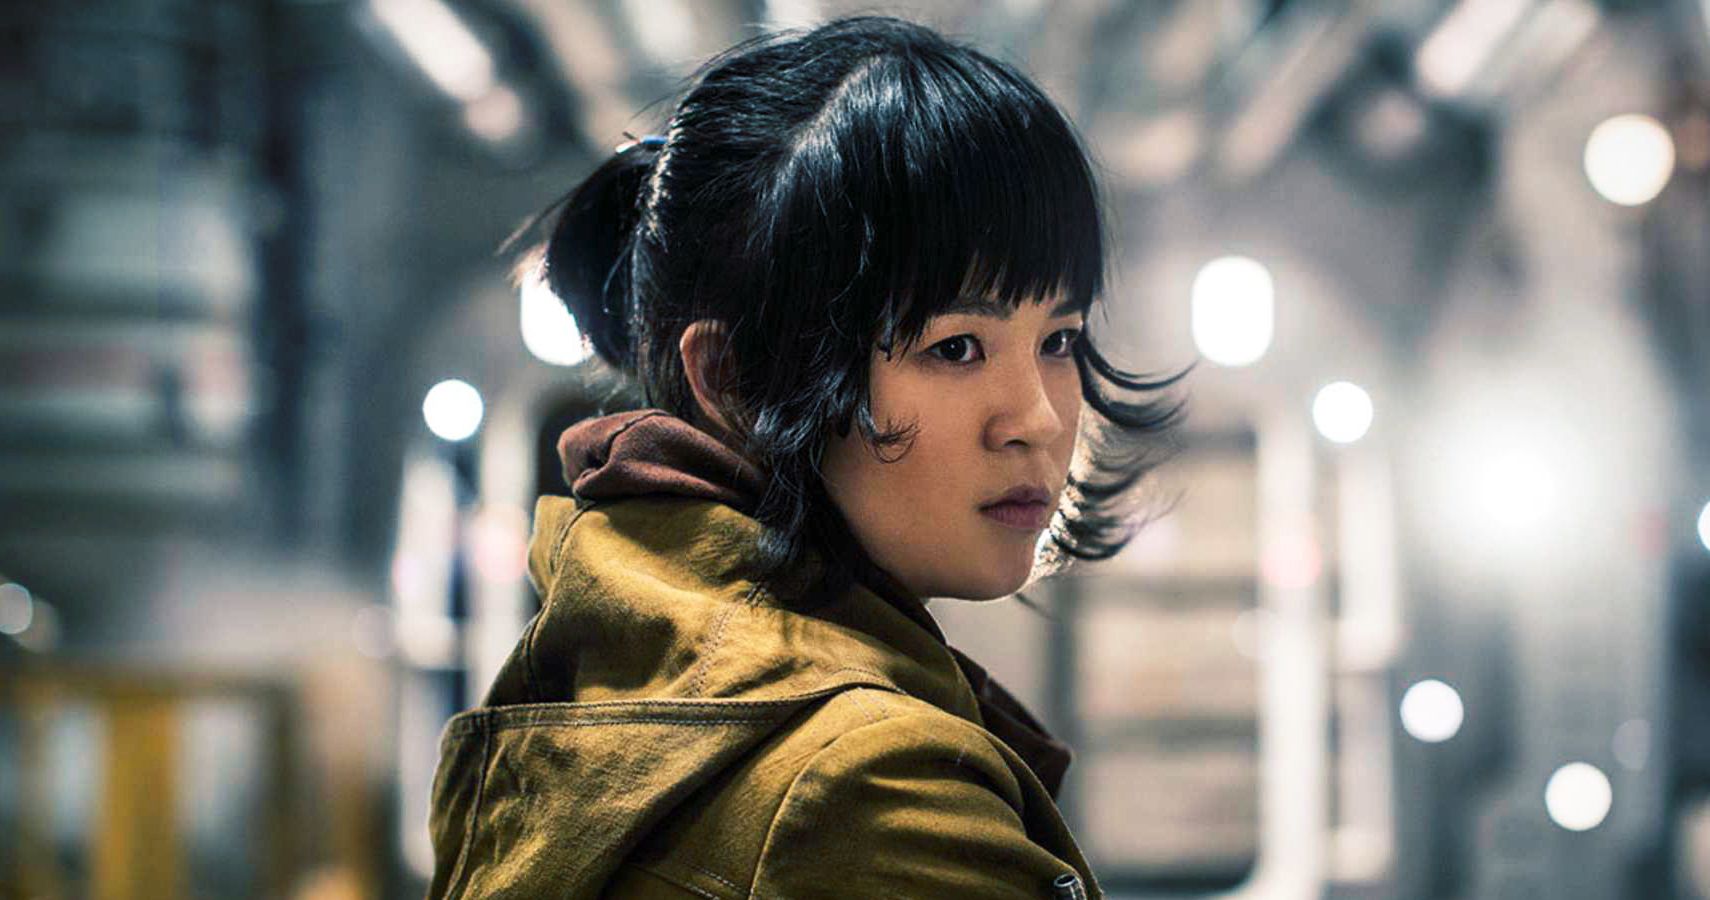 Star Wars 5 Things Wed Like to See in a Rose Tico Show (And 5 Things We Could Do Without)